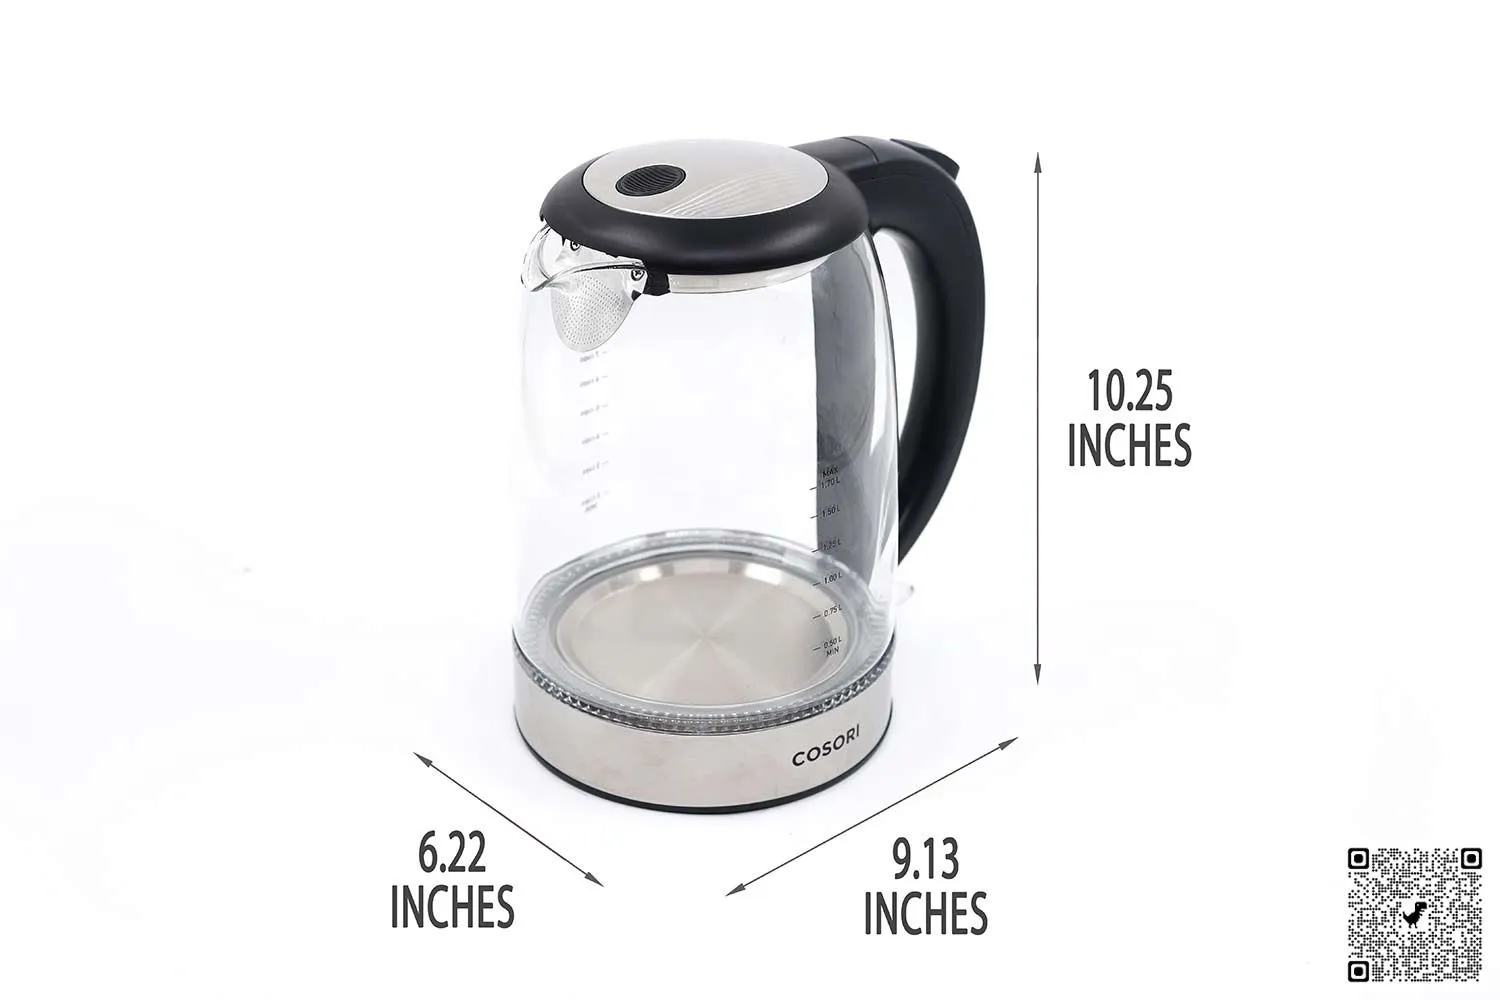 https://cdn.healthykitchen101.com/reviews/images/kettles/cosori-glass-electric-kettle-gk172-co-dimensions-cllez1unx000mzb888yz69x51.jpg